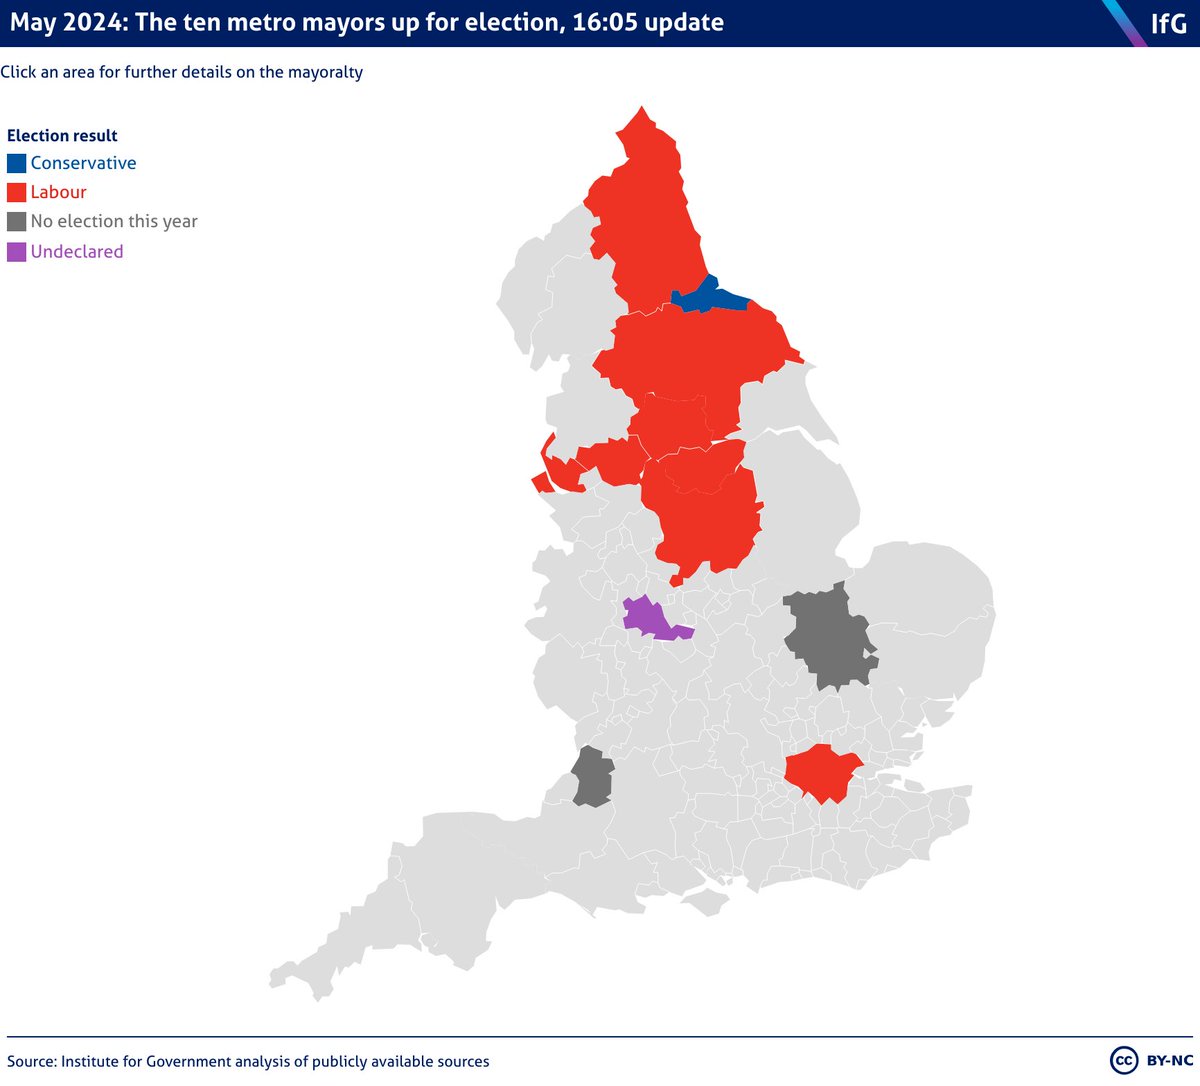 While we wait on the final result for the West Midlands, this has been a big day; almost 50% of England's population now have a metro mayor. @BCA_Allen has a rundown of all the @instituteforgov analysis of the mayoral election results